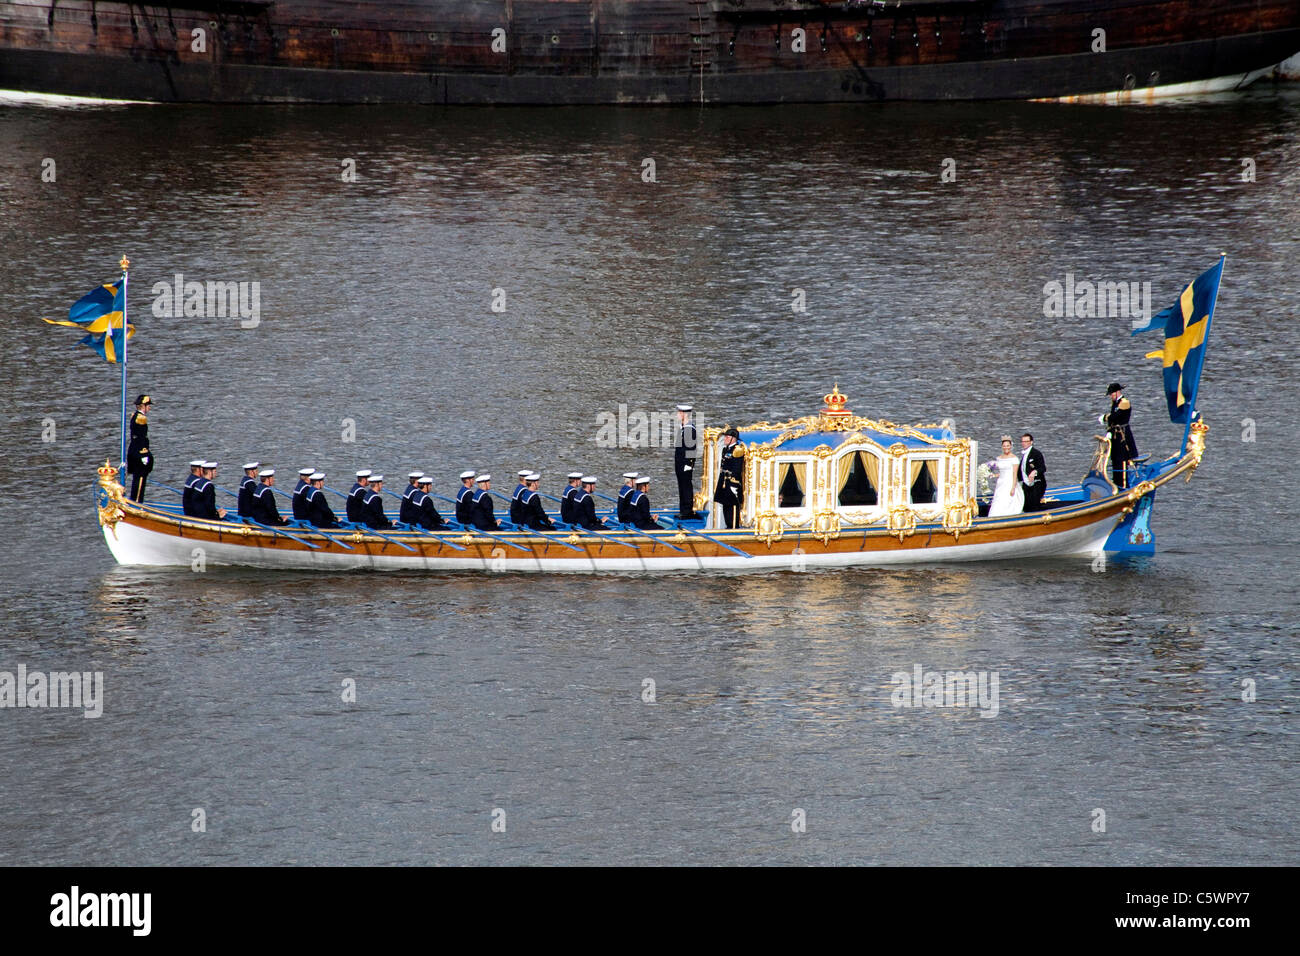 Royal wedding of Victoria of Sweden and Daniel Westling, the boatride to the church. Stock Photo